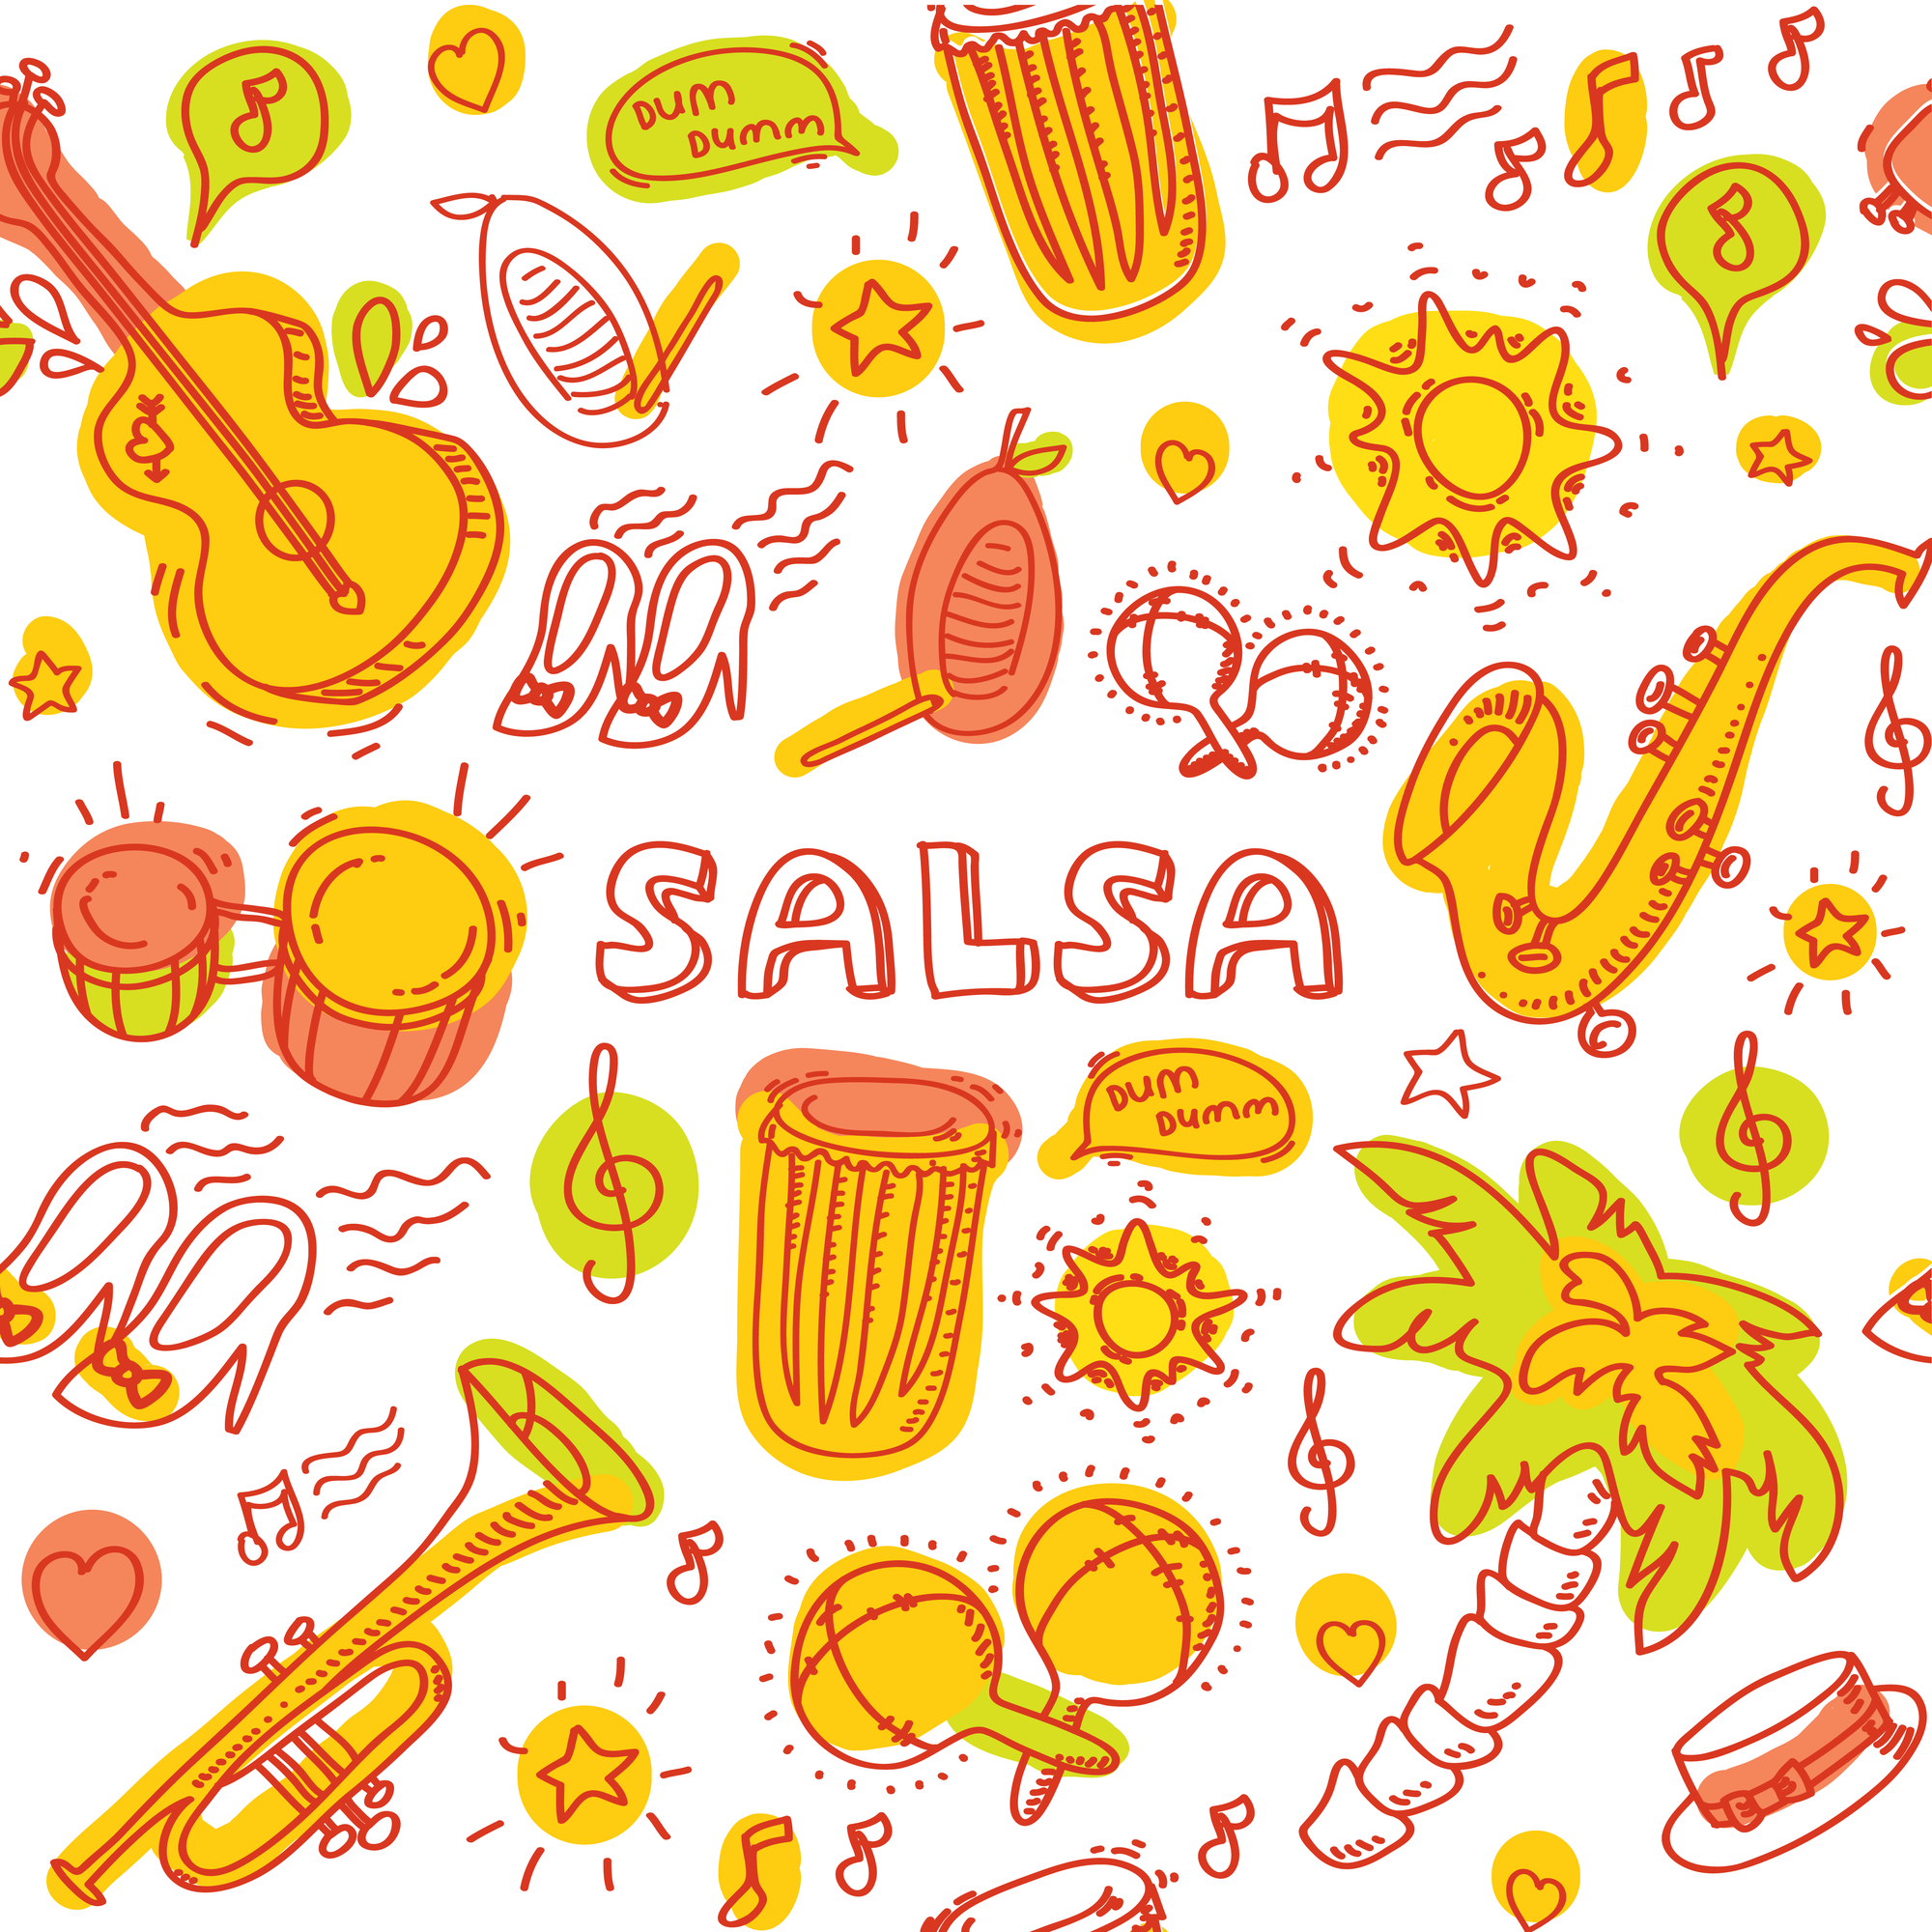 An Introduction to Latin Music: Salsa Rhythms and Applications